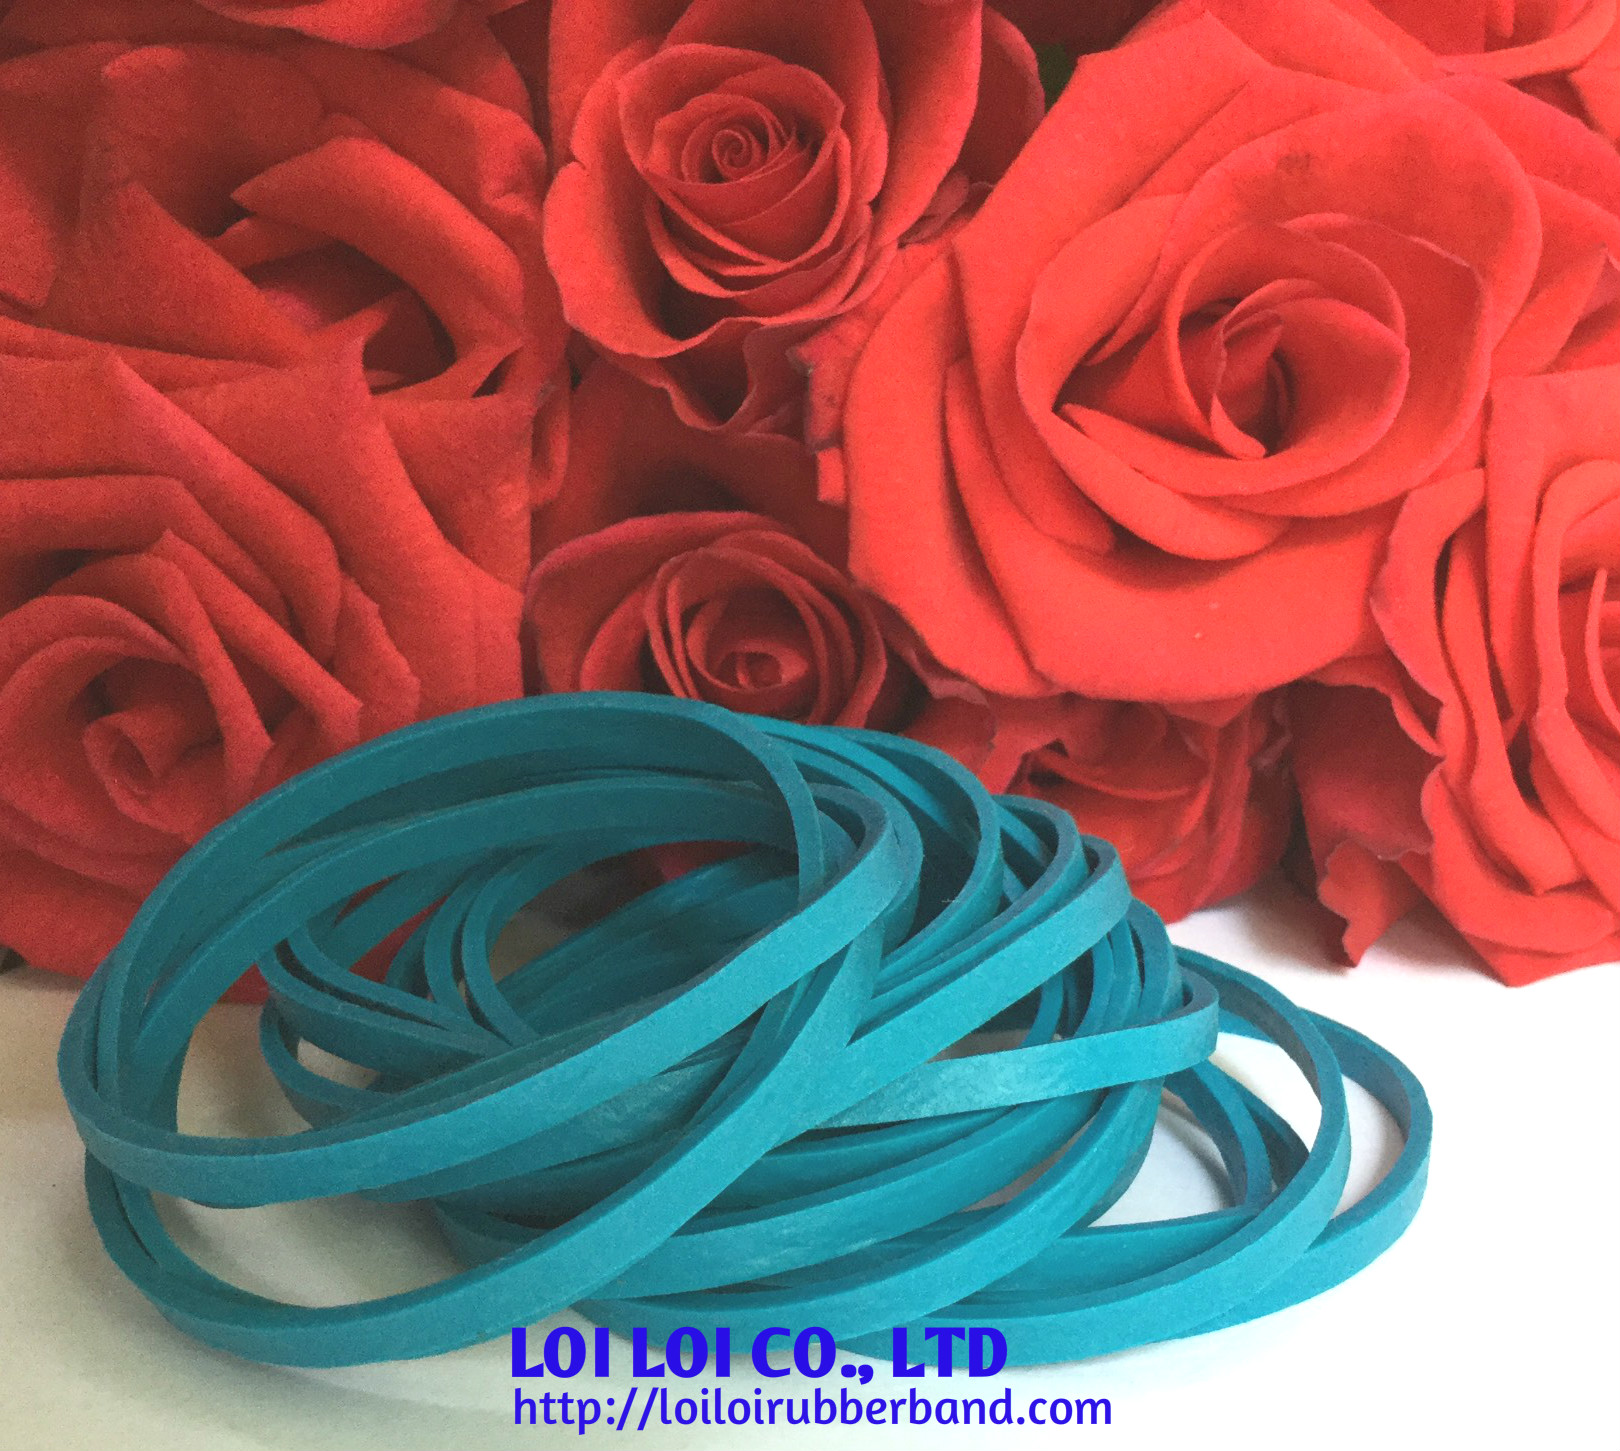 Quality different size wide natural rubber bands thickness Blue colour and many colors according to the requested from customers 